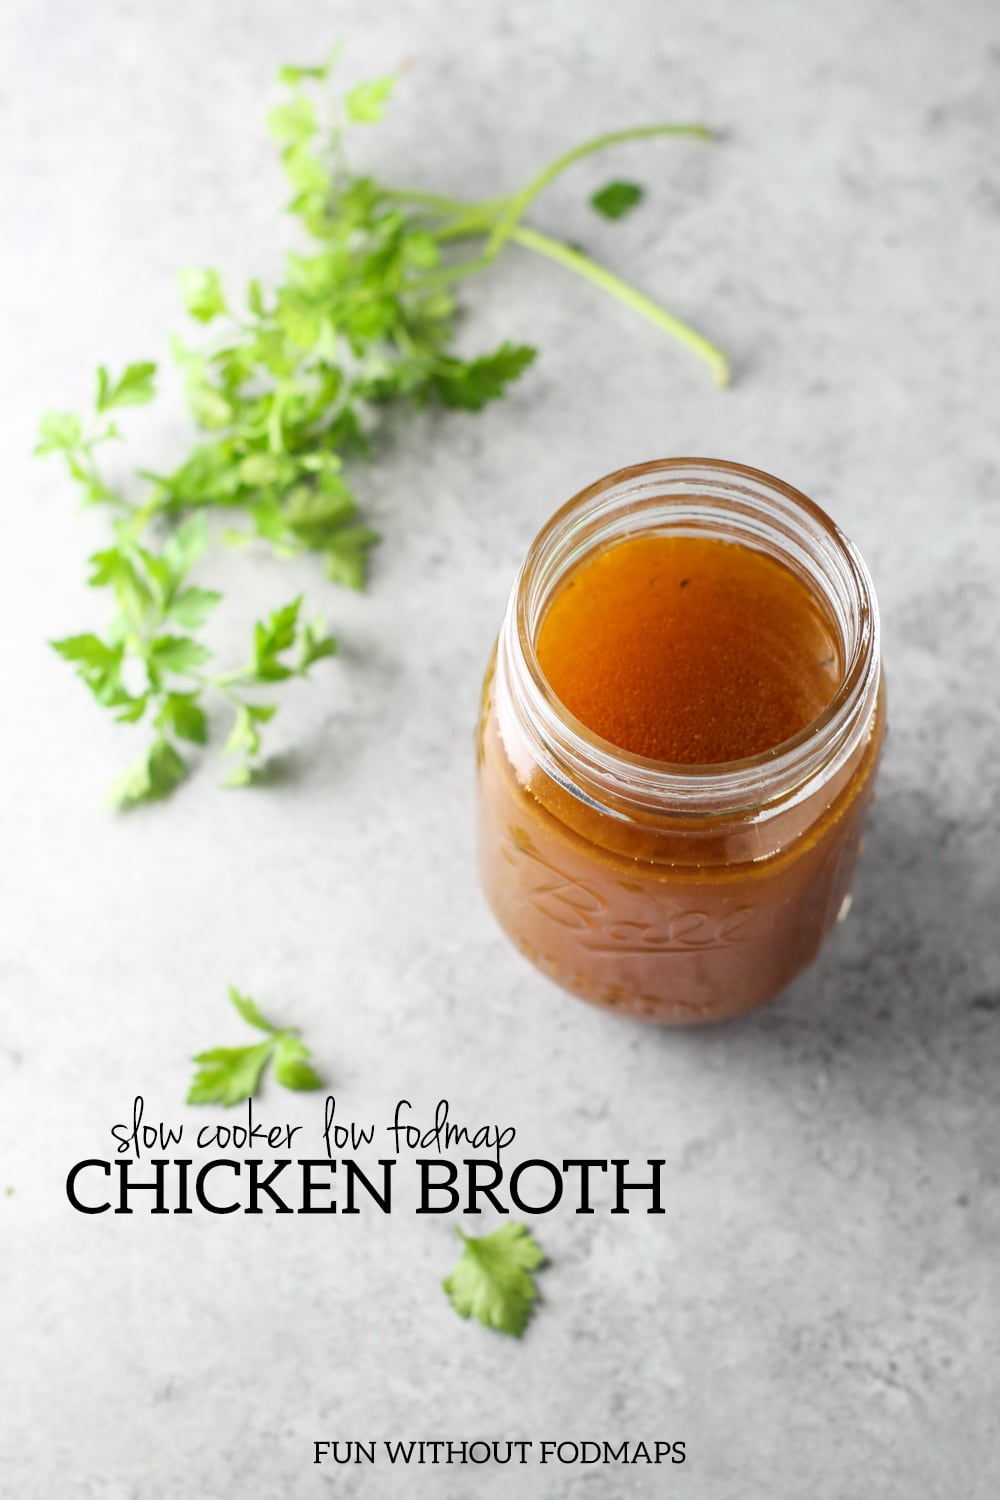 A close up of a jar filled with low FODMAP chicken broth. Next to it, black text reads "Slow Cooker Low FODMAP Chicken Broth."